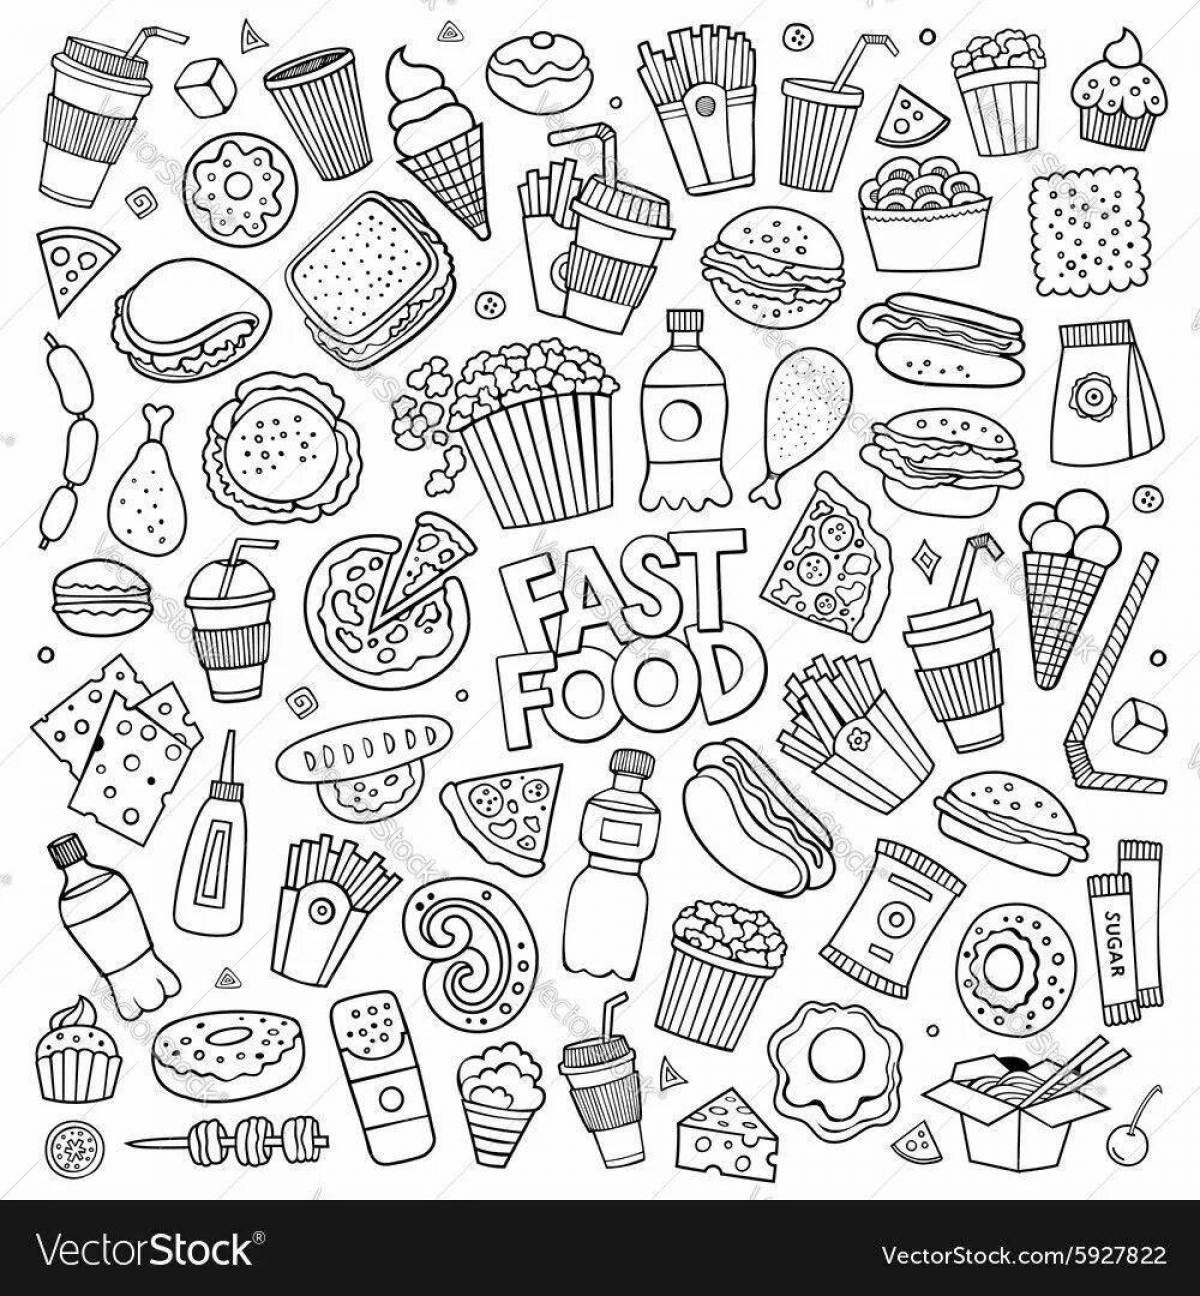 Coloring sticker with juicy food